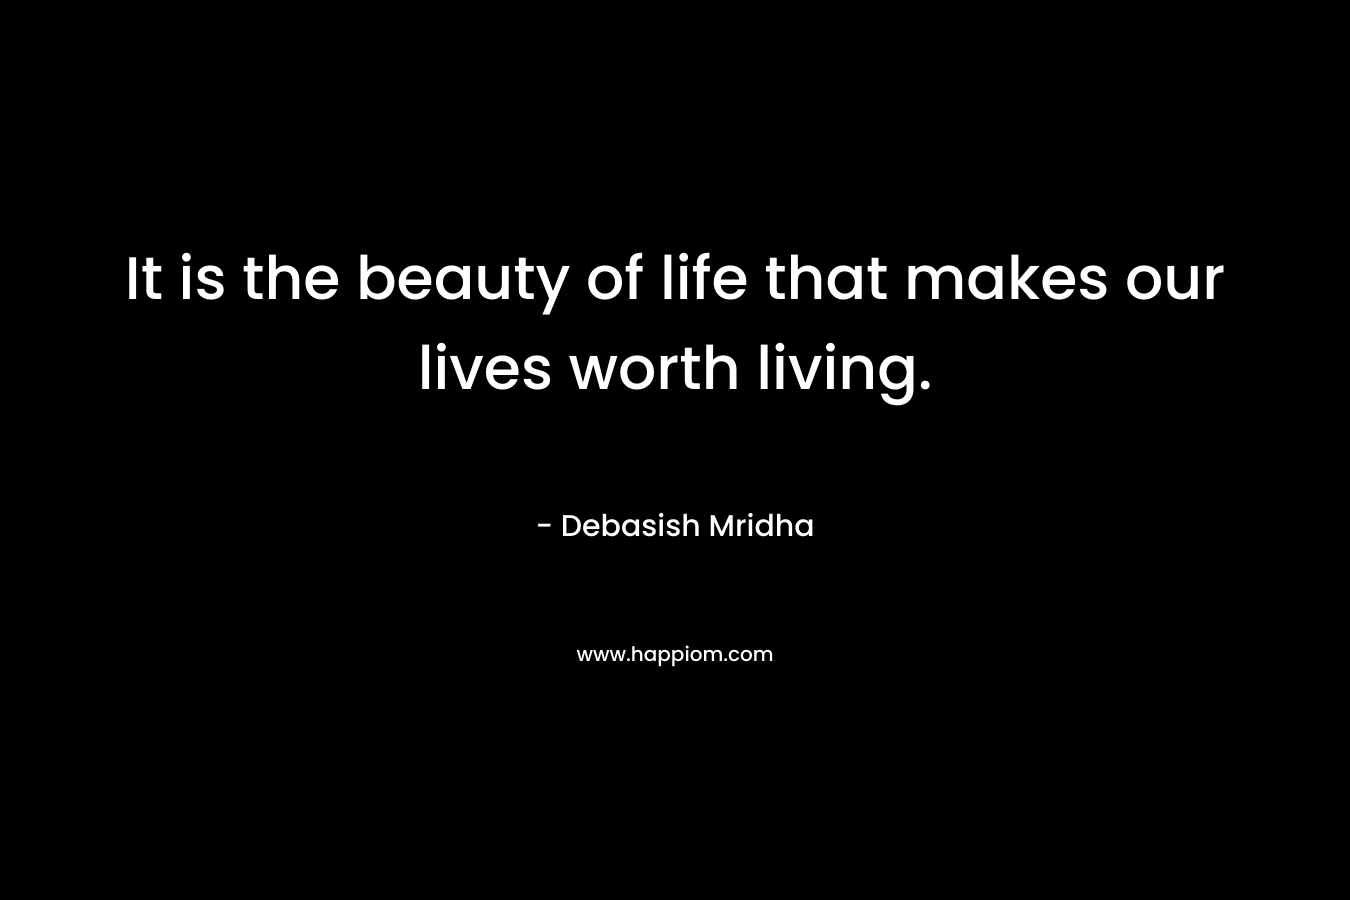 It is the beauty of life that makes our lives worth living.